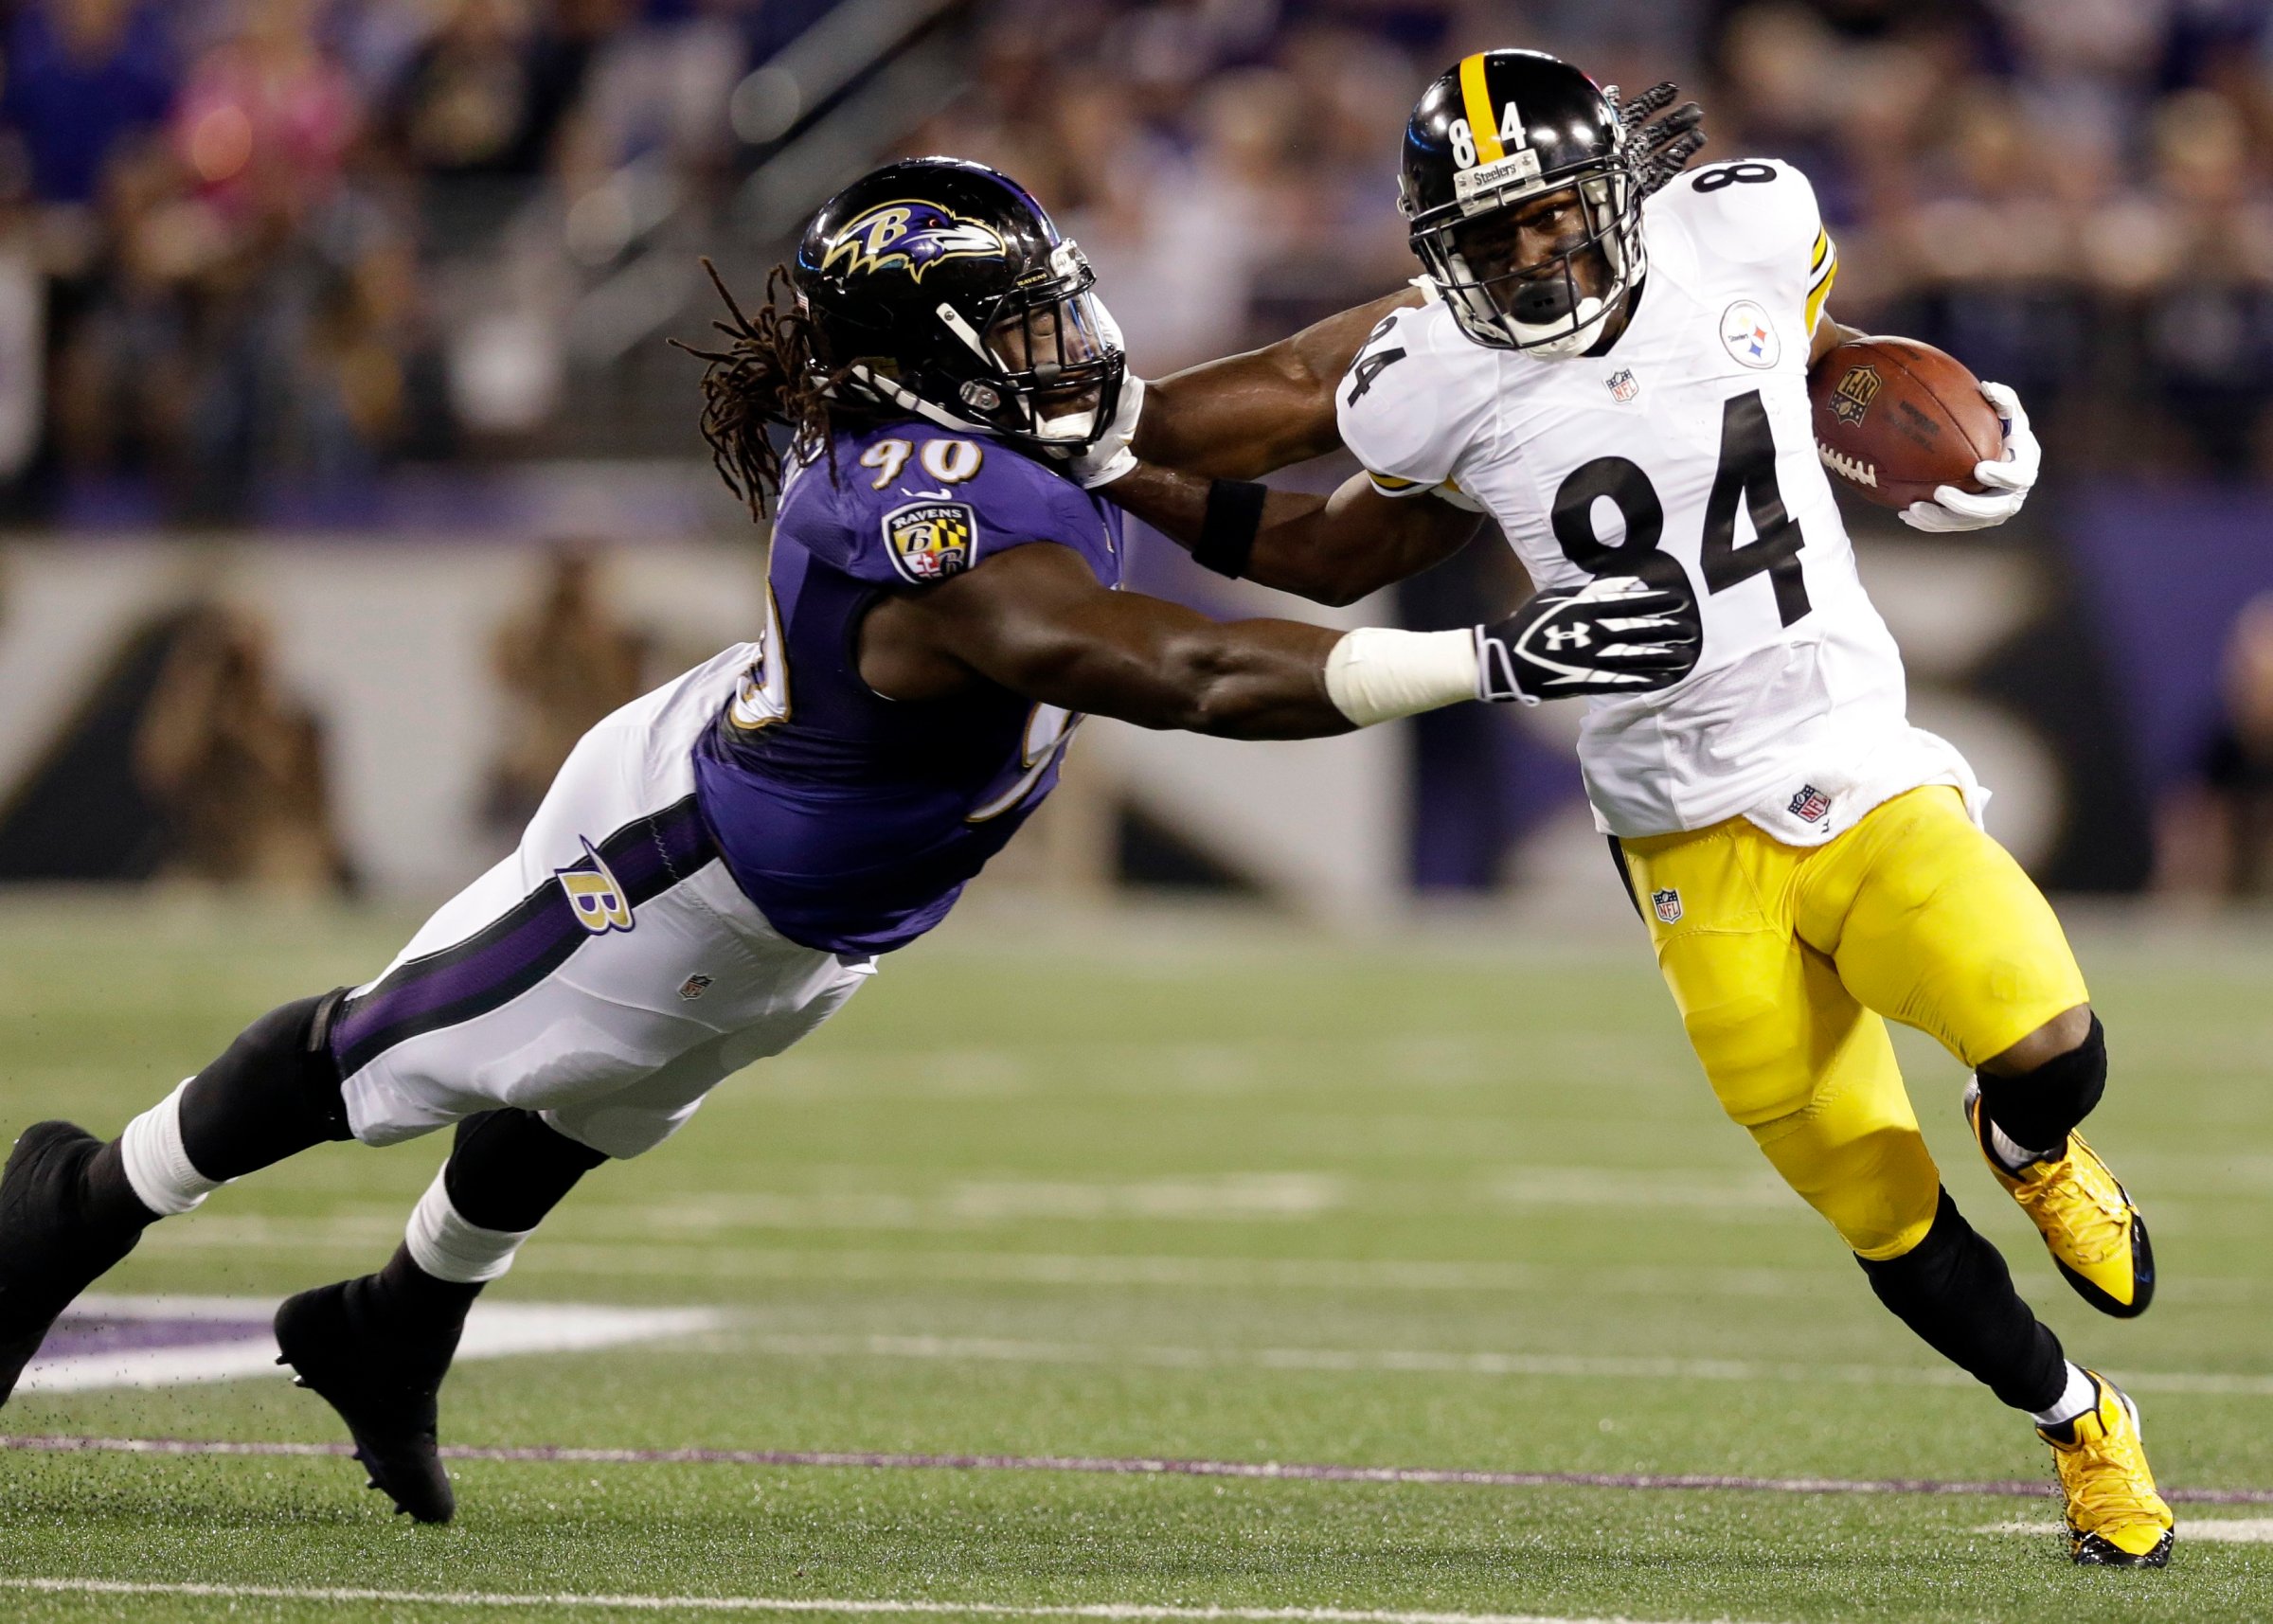 Baltimore Ravens linebacker Pernell McPhee is pushed away by Pittsburgh Steelers wide receiver Antonio Brown during the first half of an NFL football game on Sept. 11, 2014, in Baltimore.